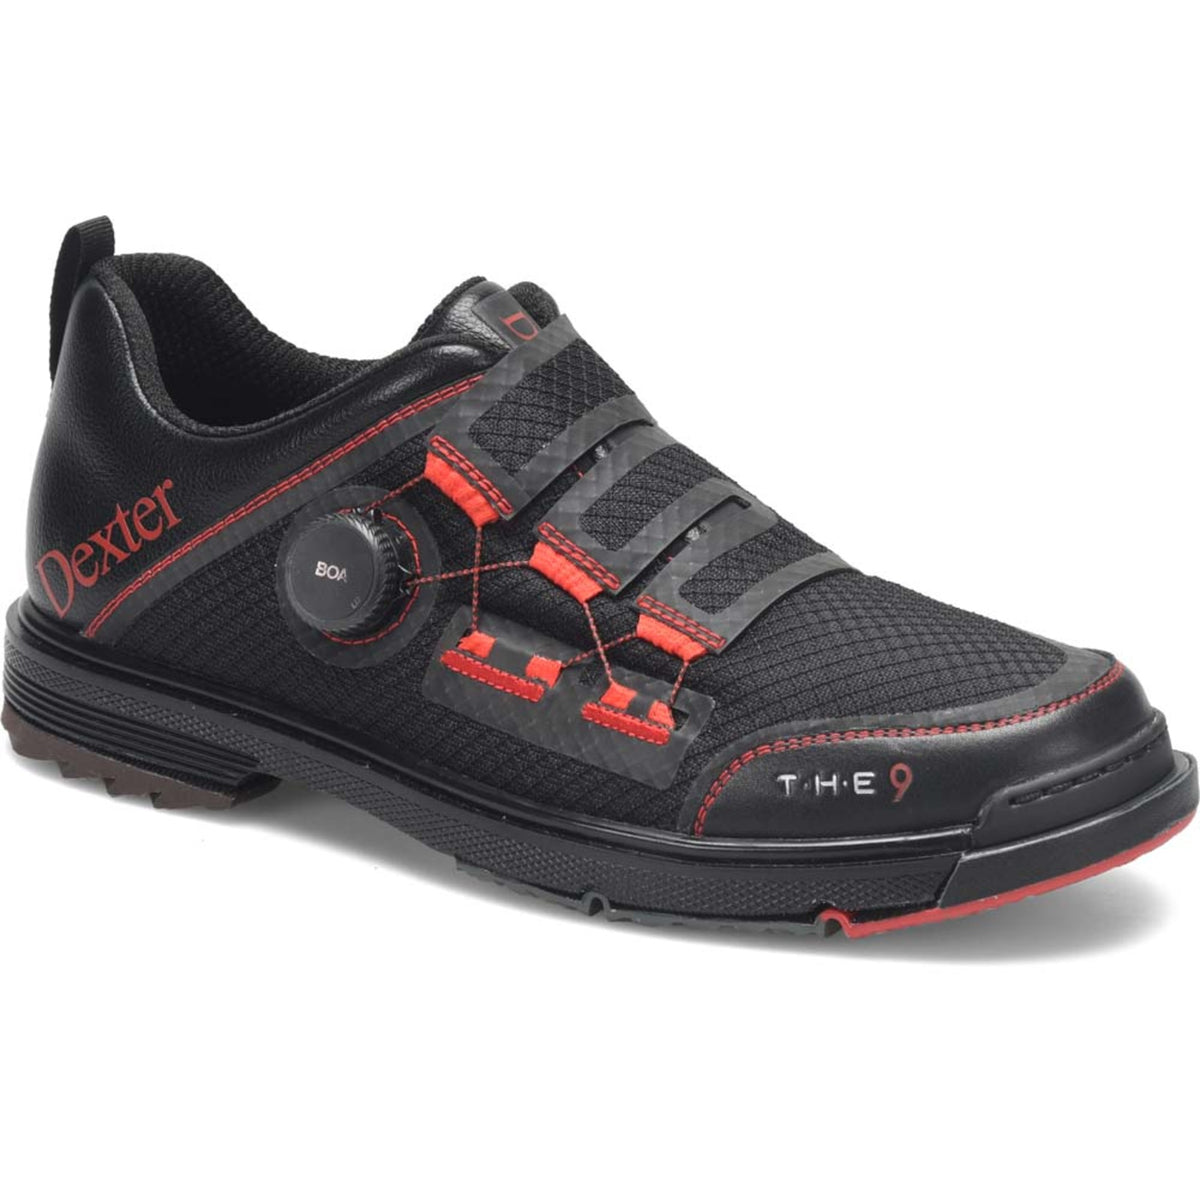 The 9 Stryker Boa Black/ Red Wide Shoes